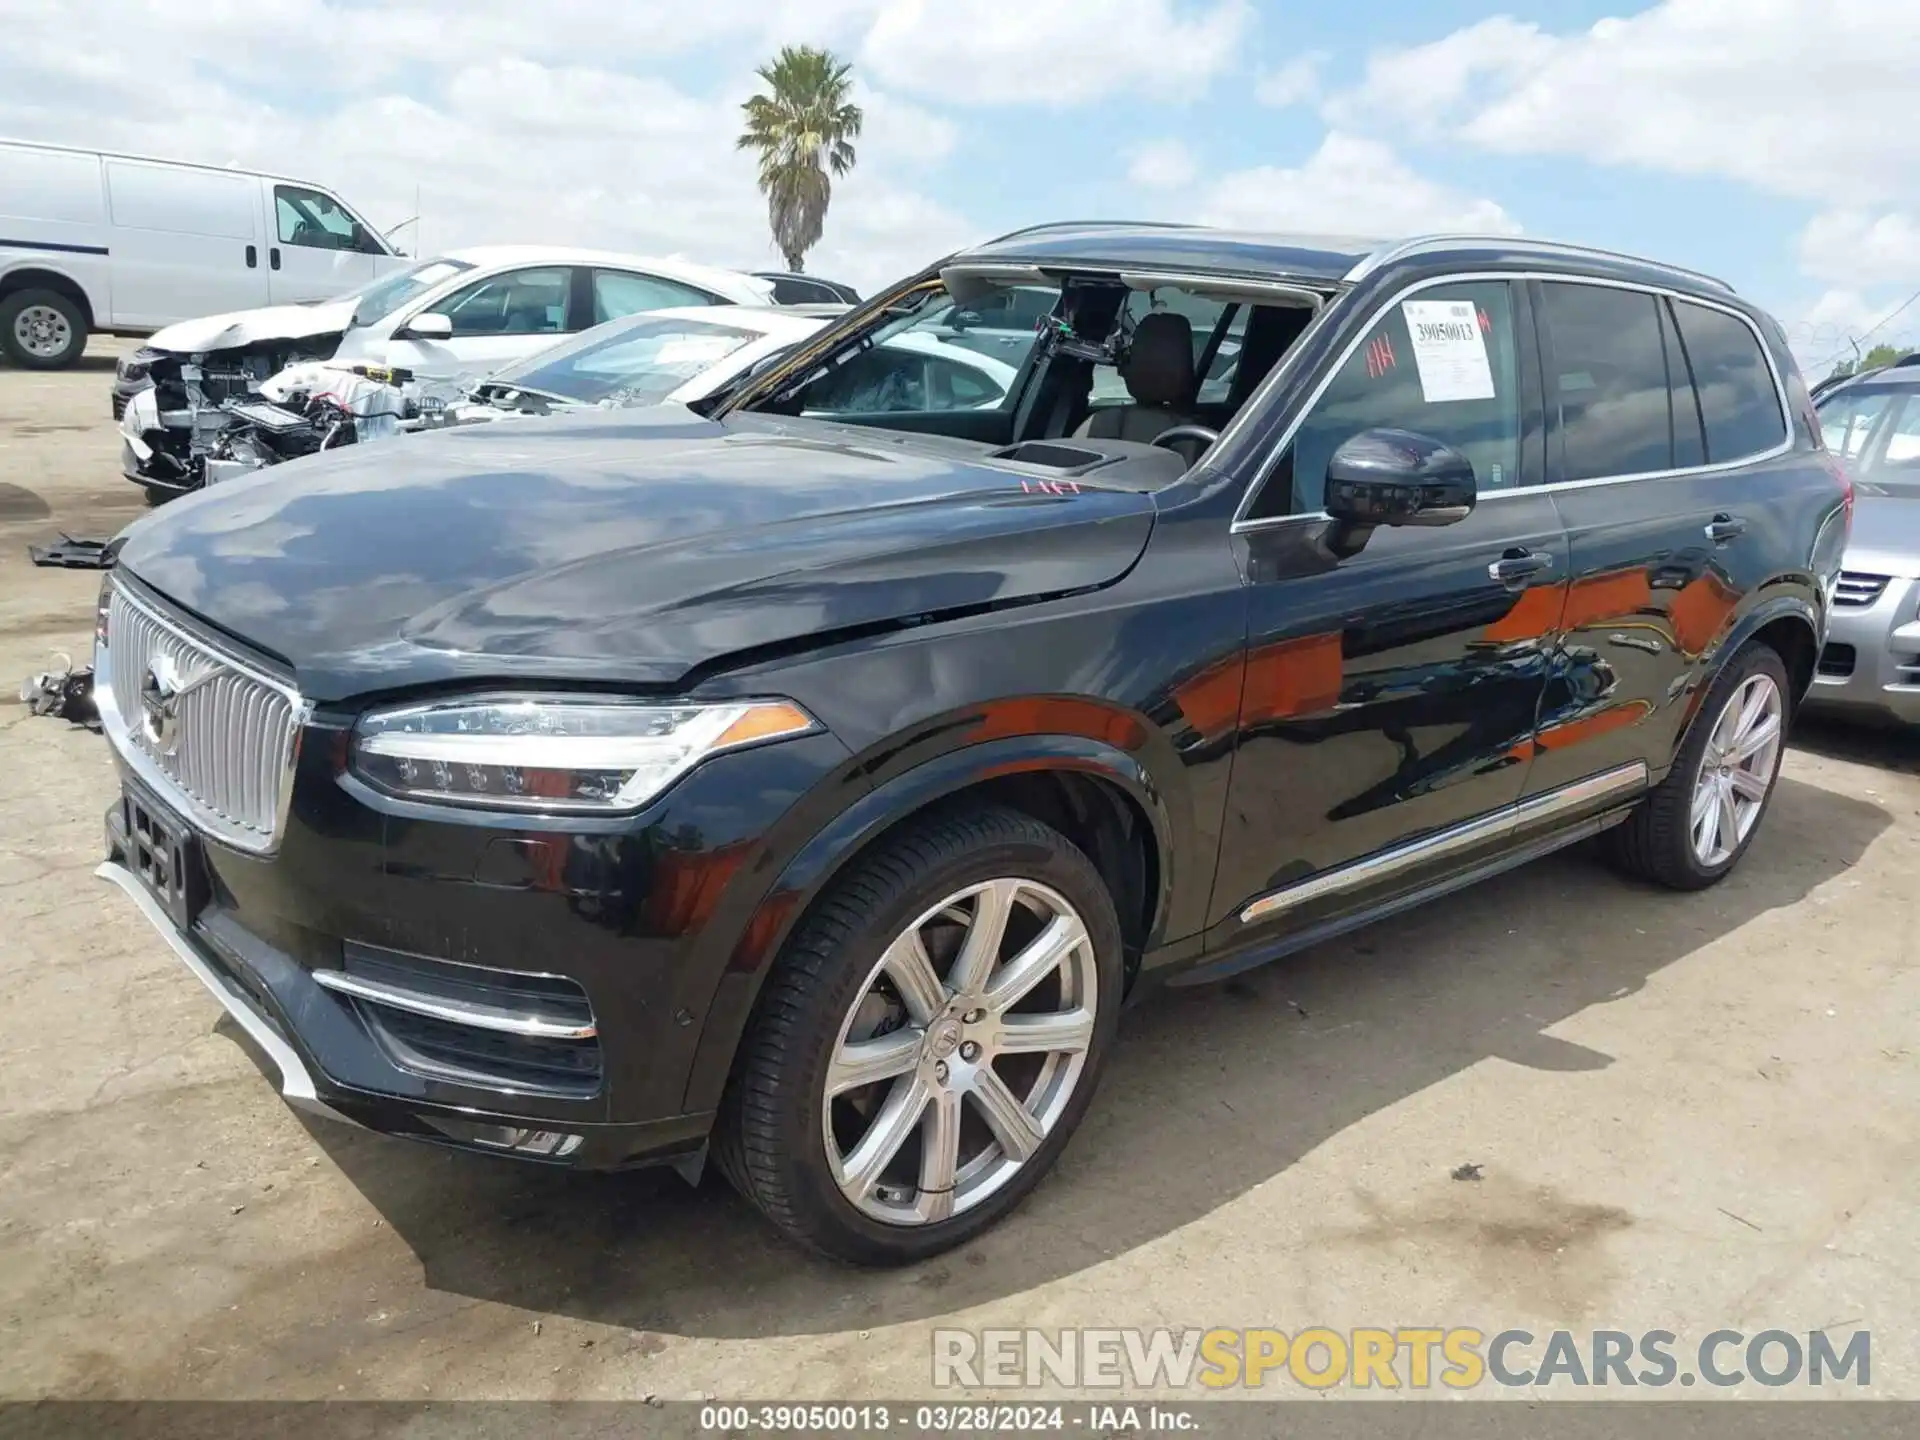 2 Photograph of a damaged car YV4A22PL1K1468484 VOLVO XC90 2019